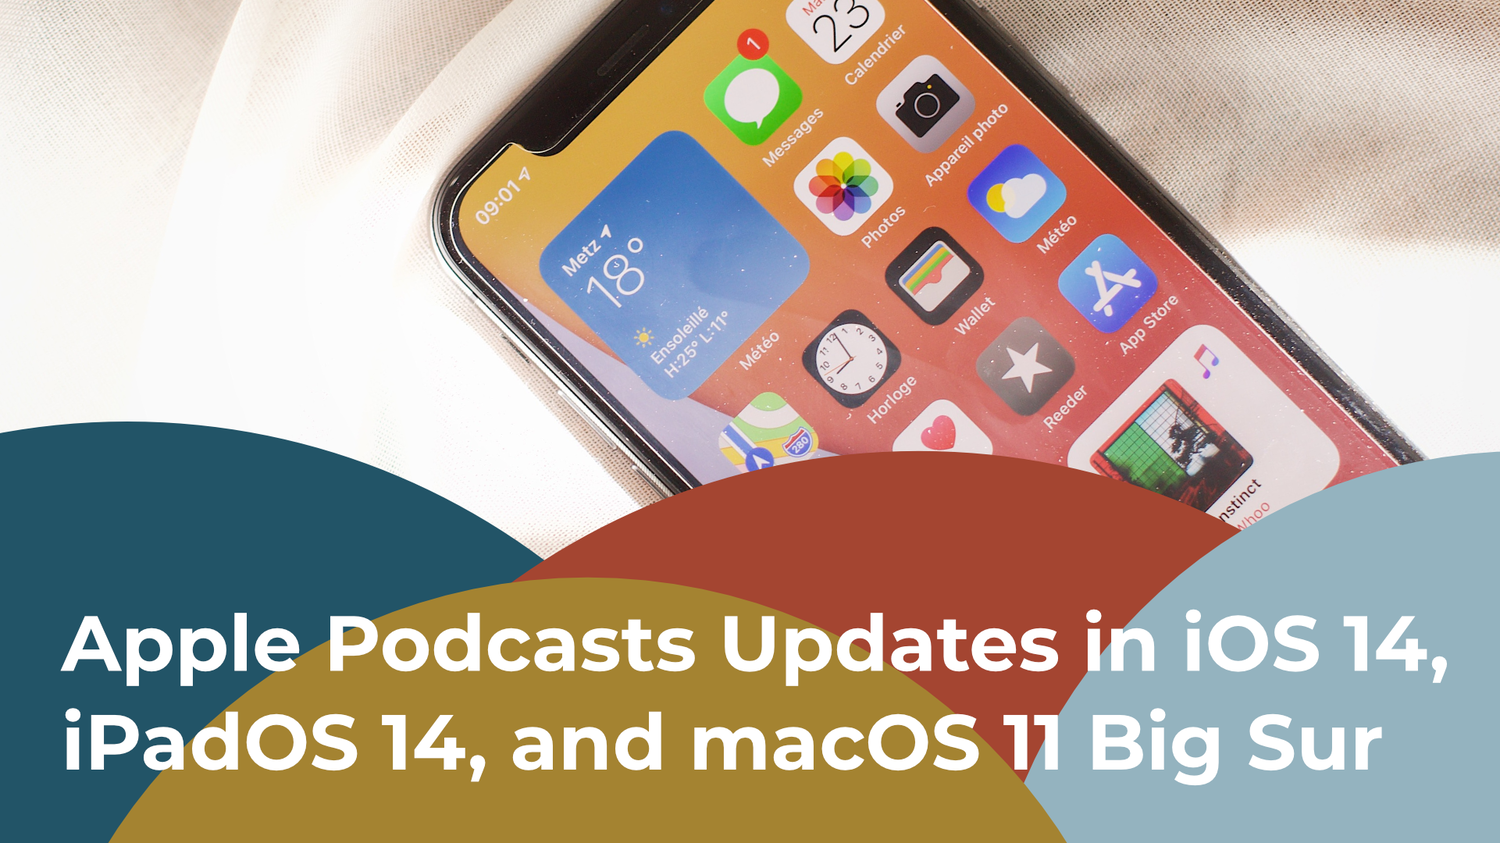 Apple Podcasts Updates In Ios 14 Ipados 14 And Macos 11 Big Sur By Sonics Podcasts Sonics Podcasts Medium